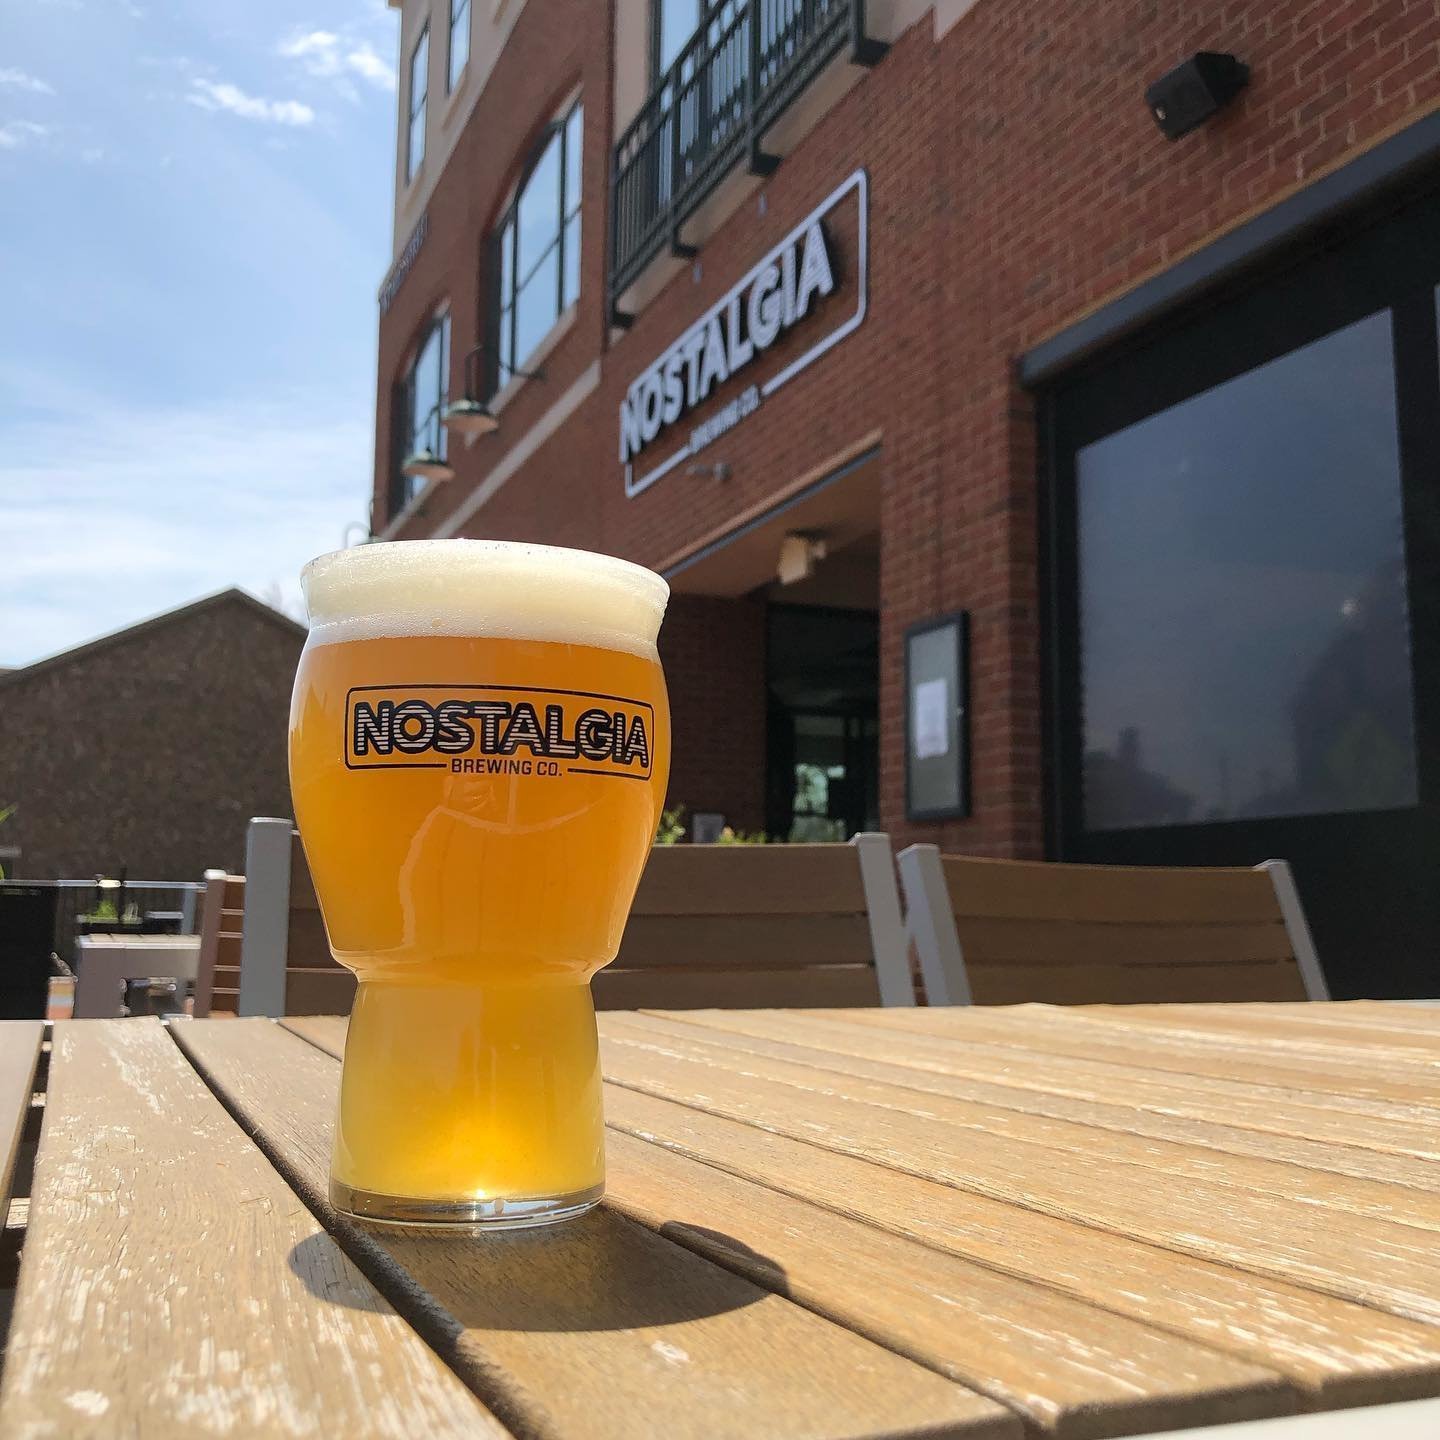 🎉 It&rsquo;s Saturday and Nostalgia Brewing is where your weekend peaks! 🌟 Come join us in Creekside Gahanna, where every sip is a celebration.

🍻 Dive into our diverse lineup of craft beers on tap. Feeling adventurous? Try a flight of 5 for just 